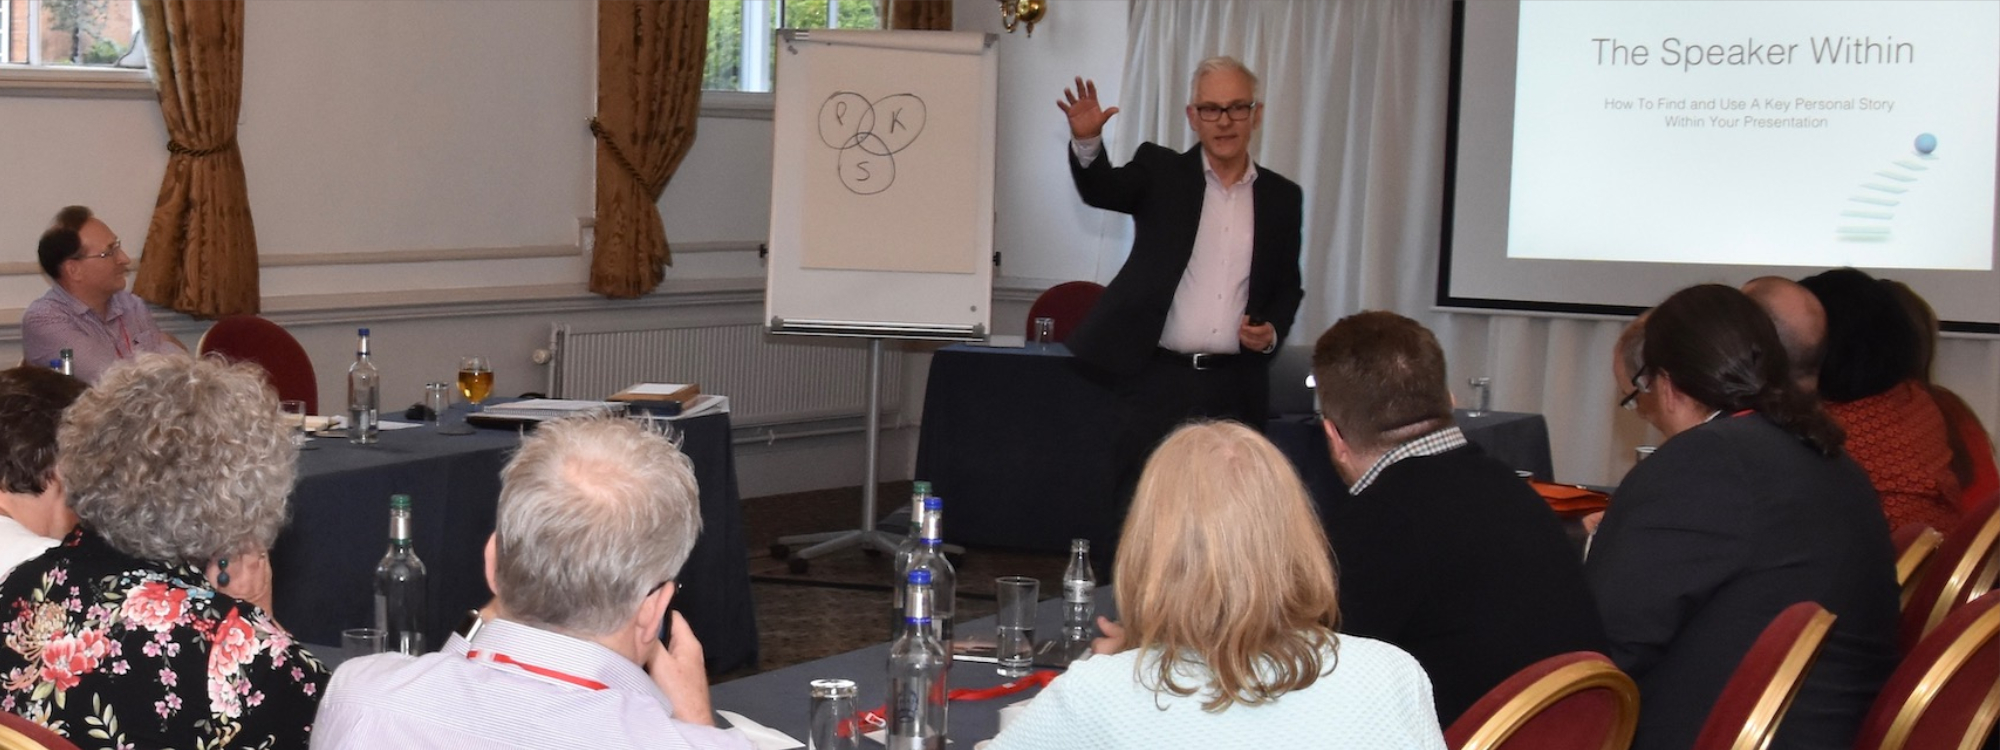 Mastery Series: Mike Blissett's top tips to be a confident public speaker